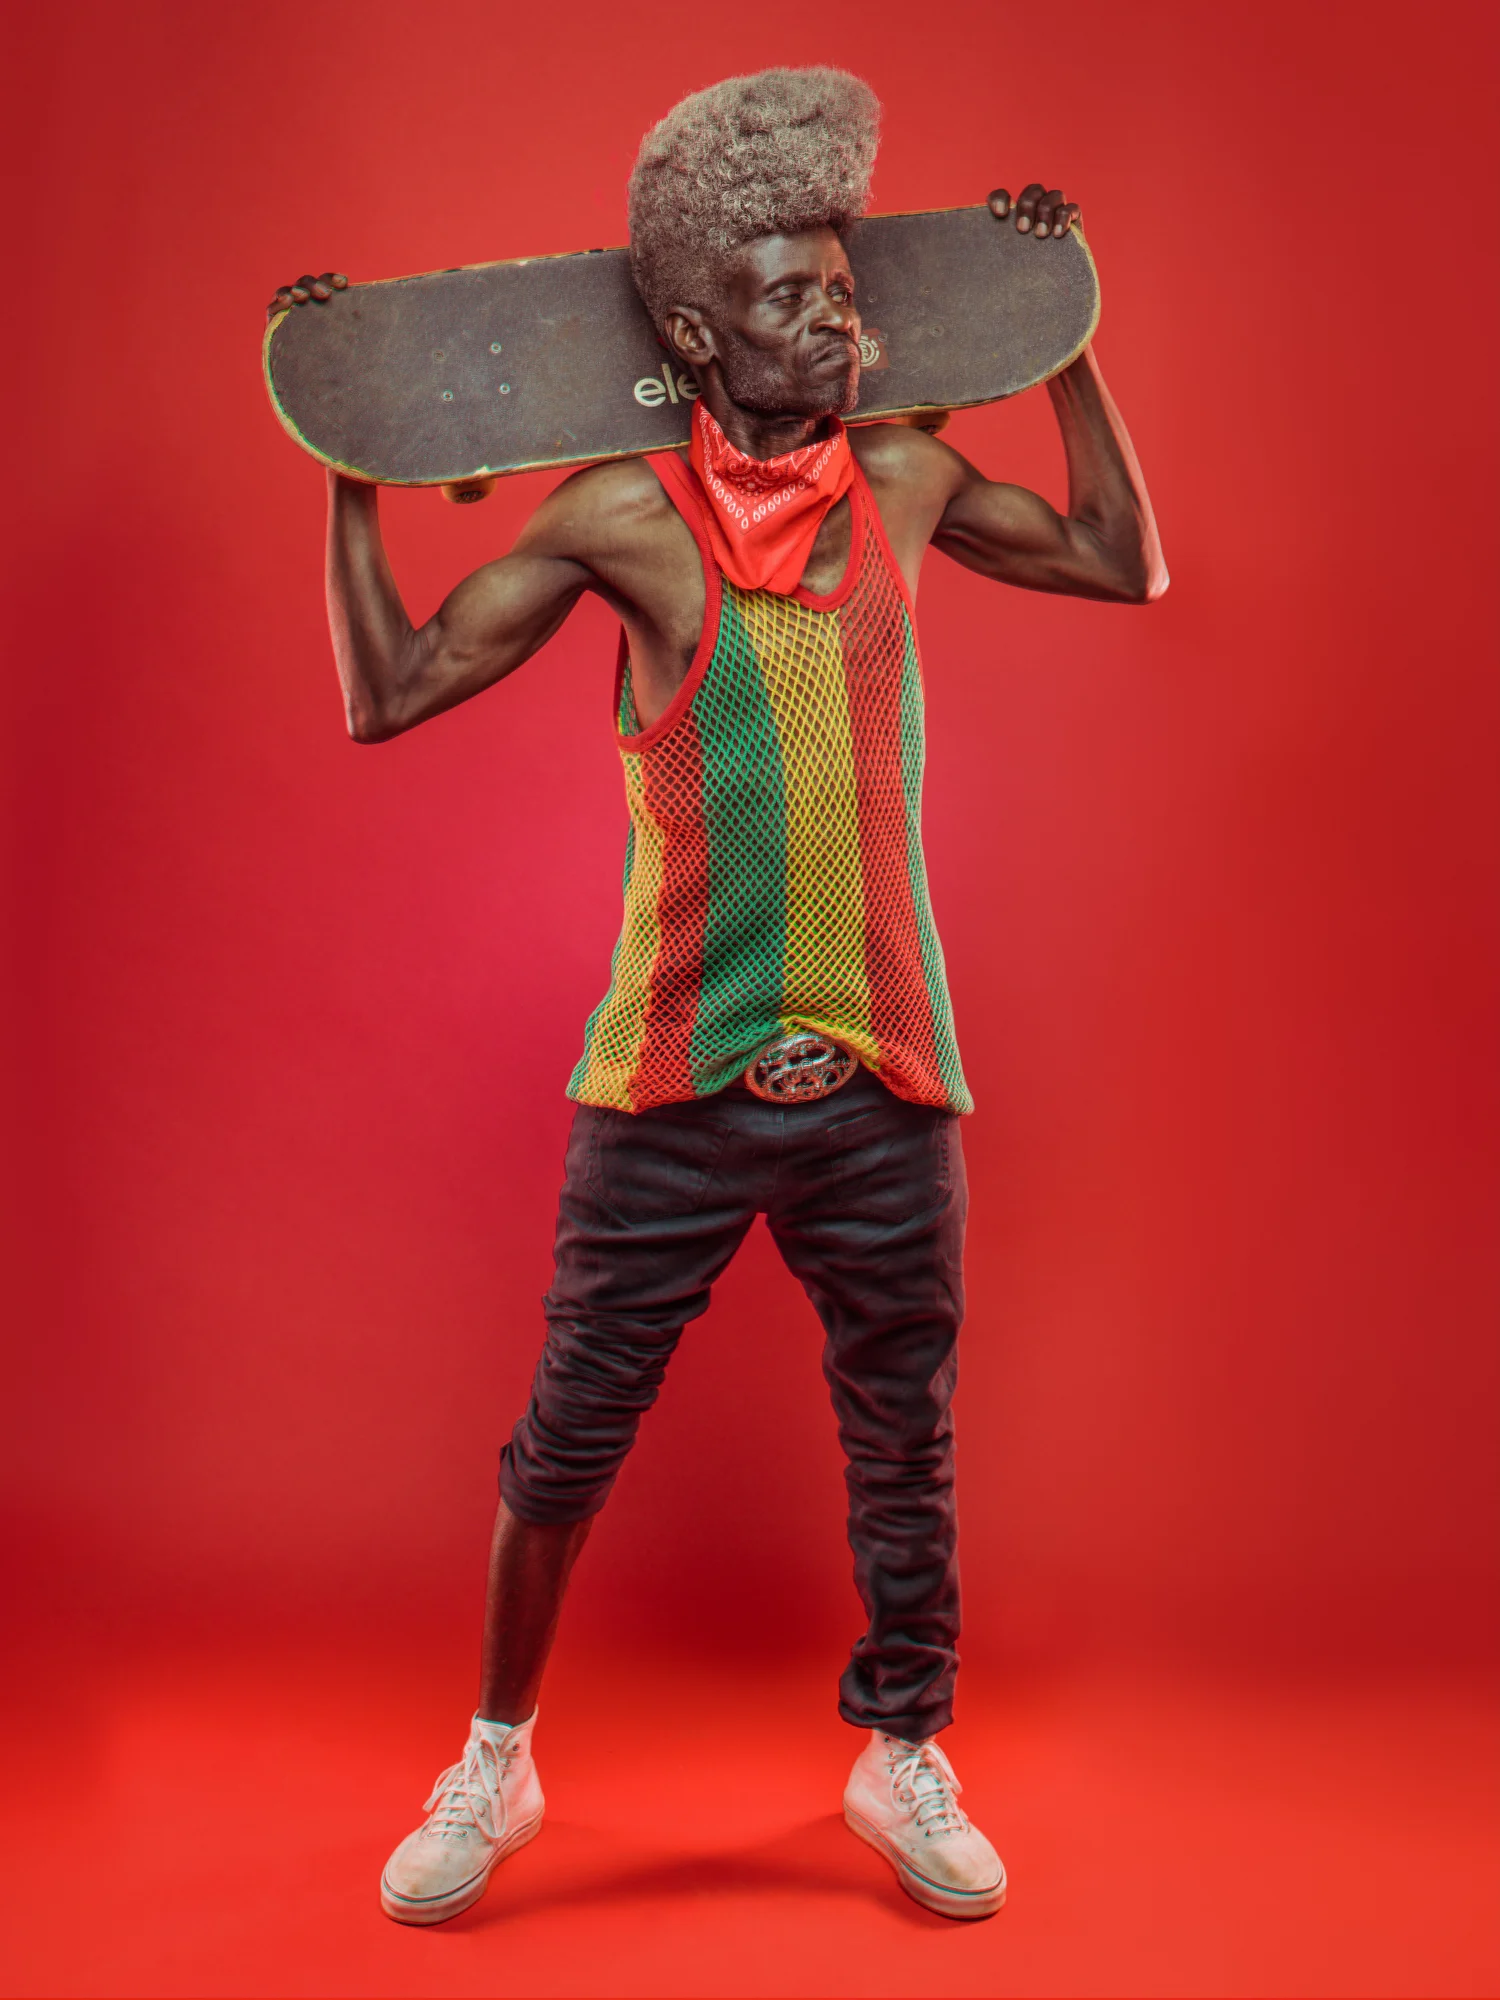 A man stands and holds a skateboard behind his head. He stands in front of a bright red background. He wears white shoes, black bants (rolled up on his right leg), and a green, yellow, and red-striped mesh top.